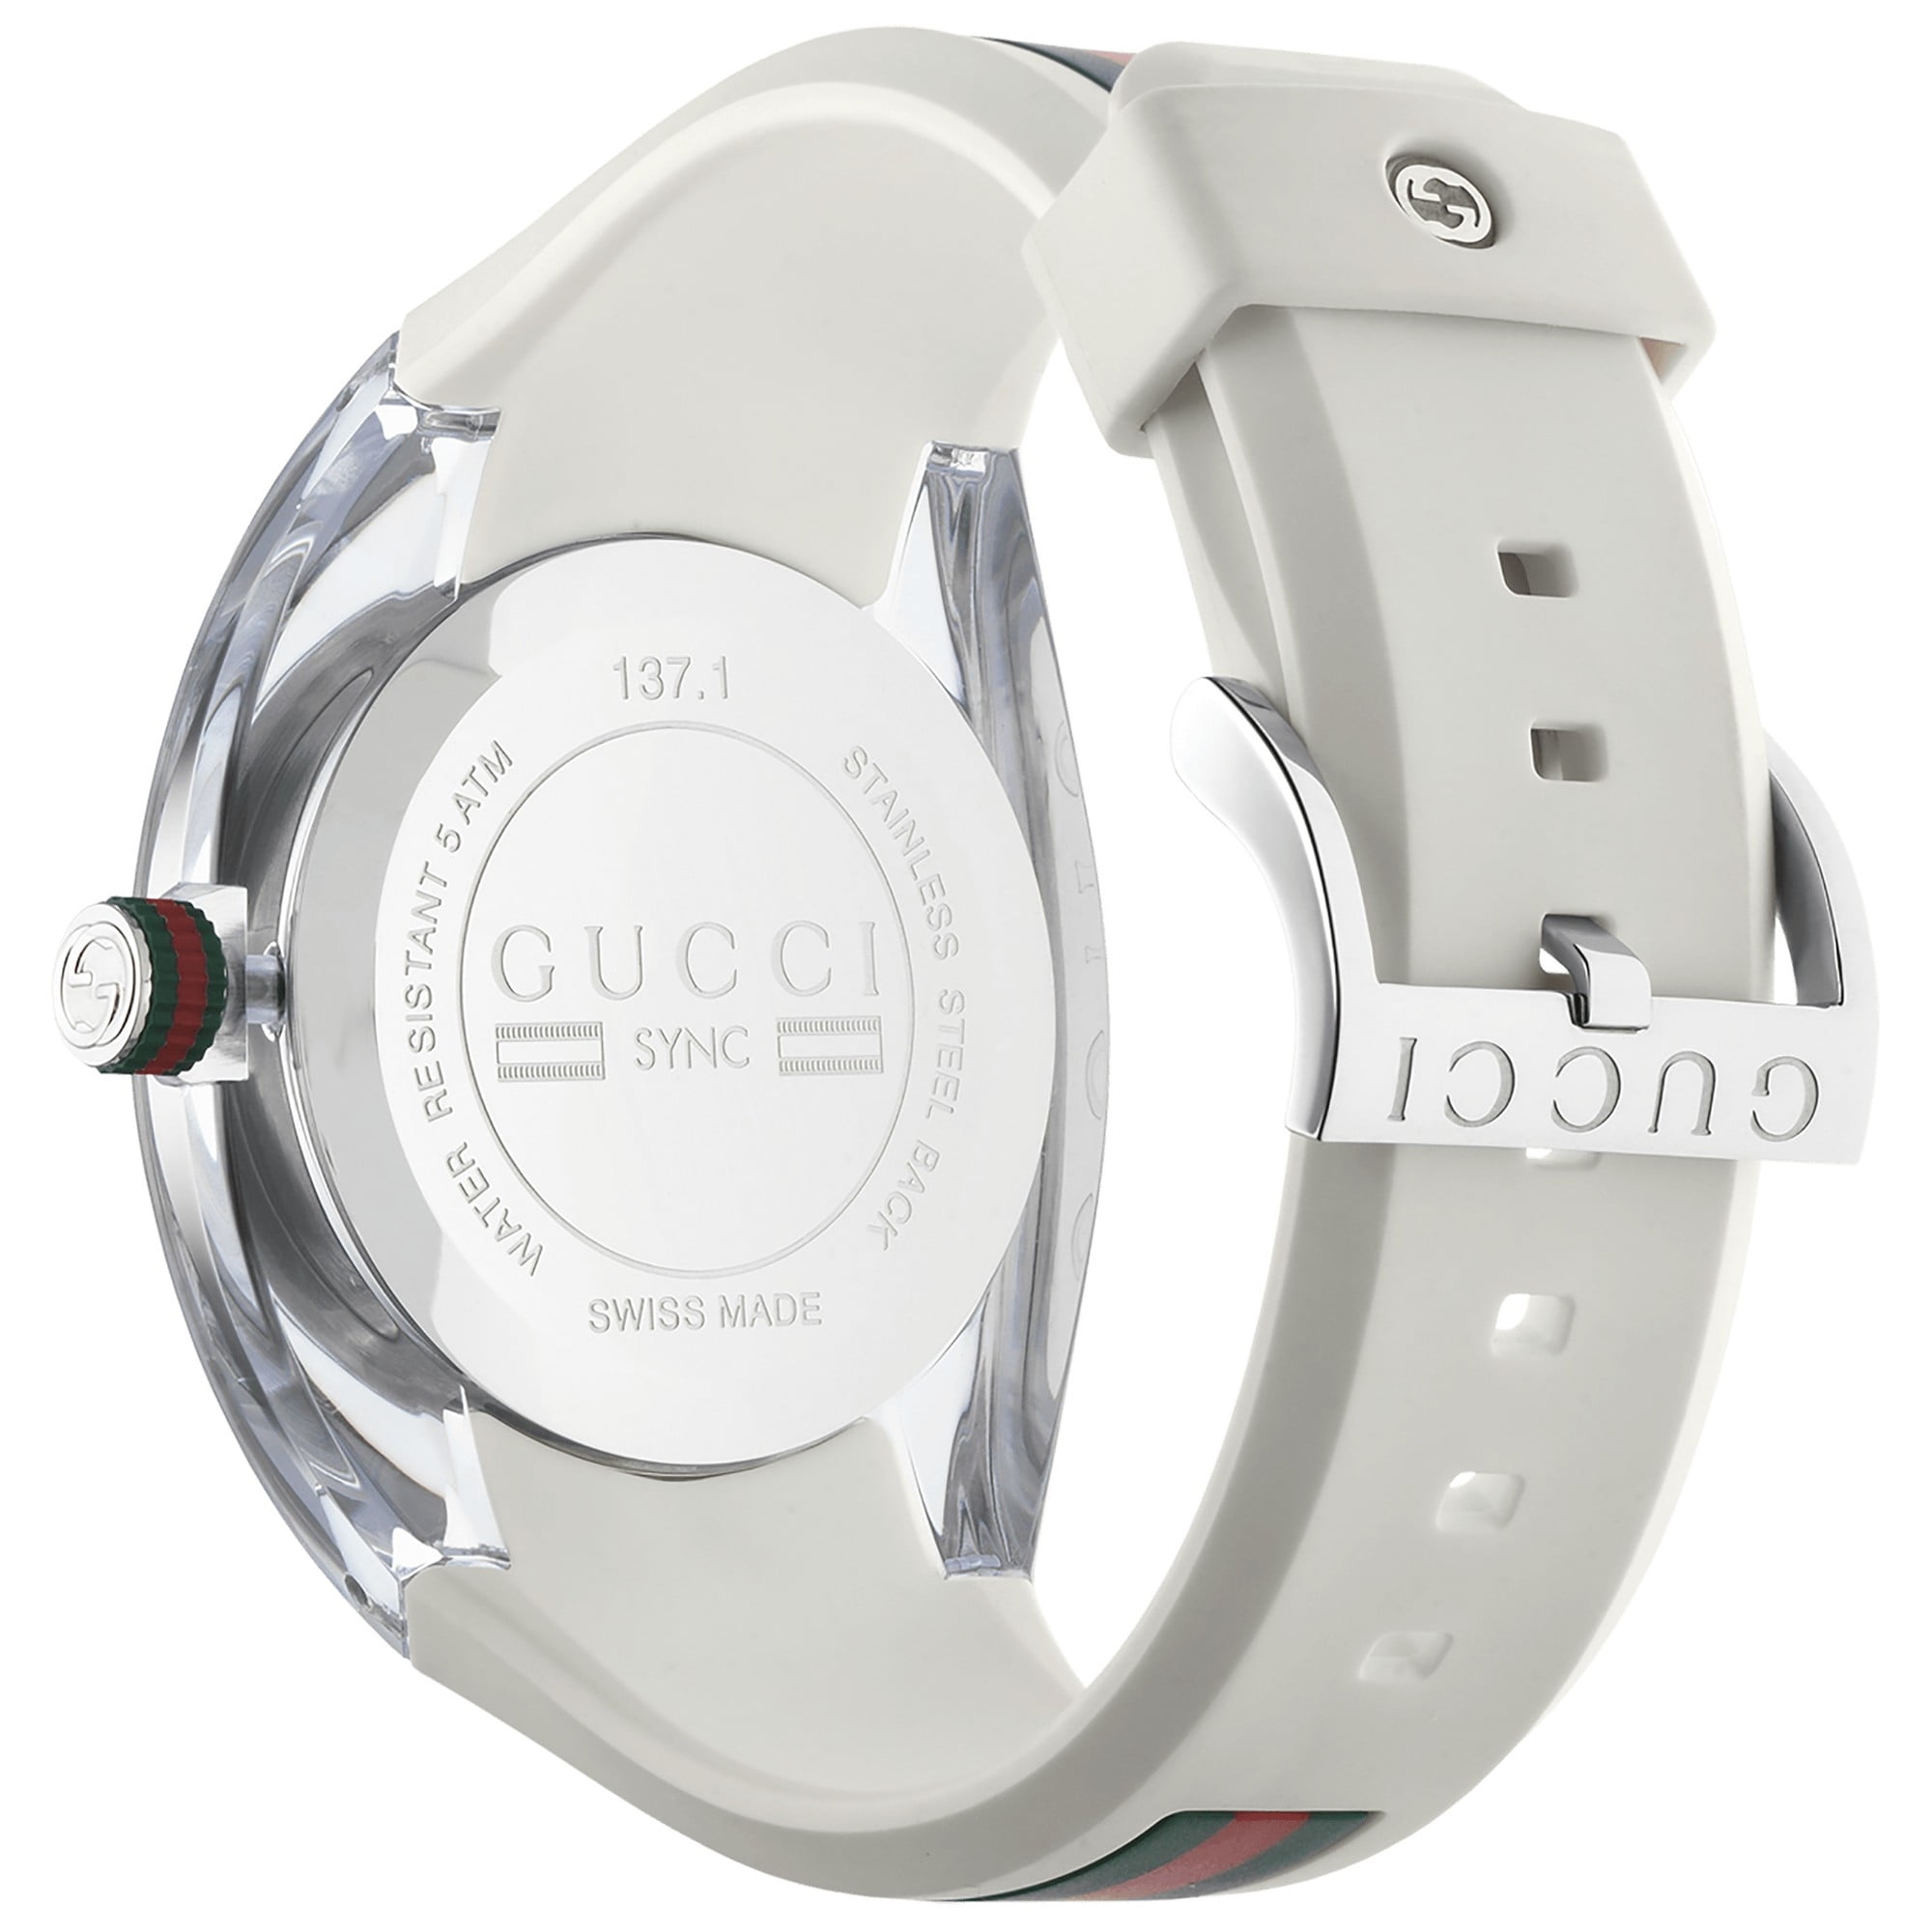 gucci sync white rubber unisex watch